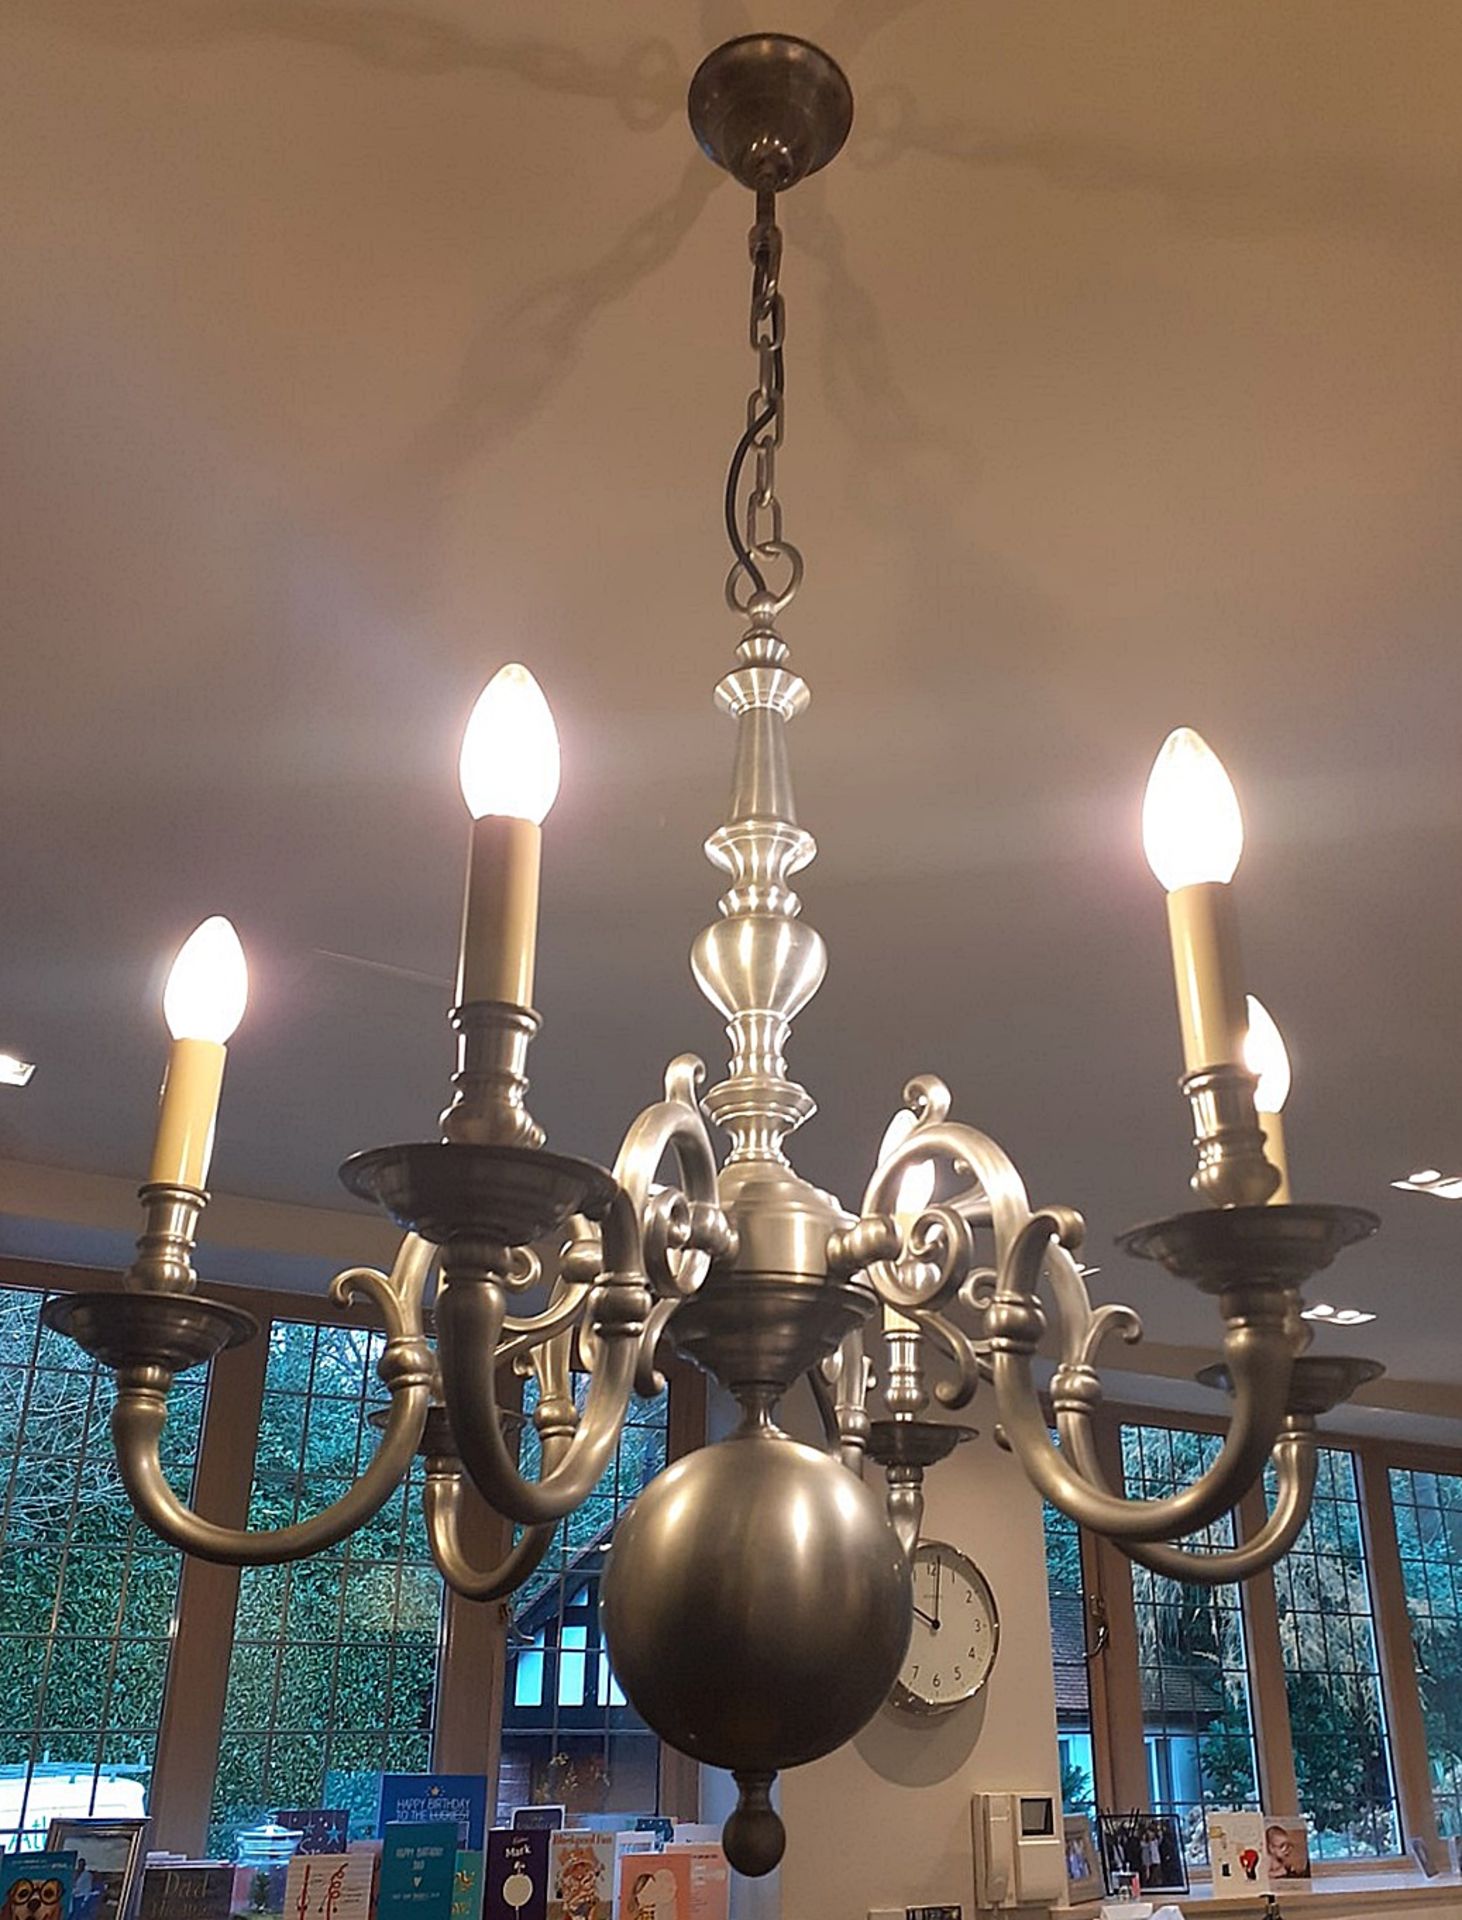 1 x Ornate 6-Arm Chandelier With An Antique Bronze Finish - NO VAT ON THE HAMMER - Preowned -